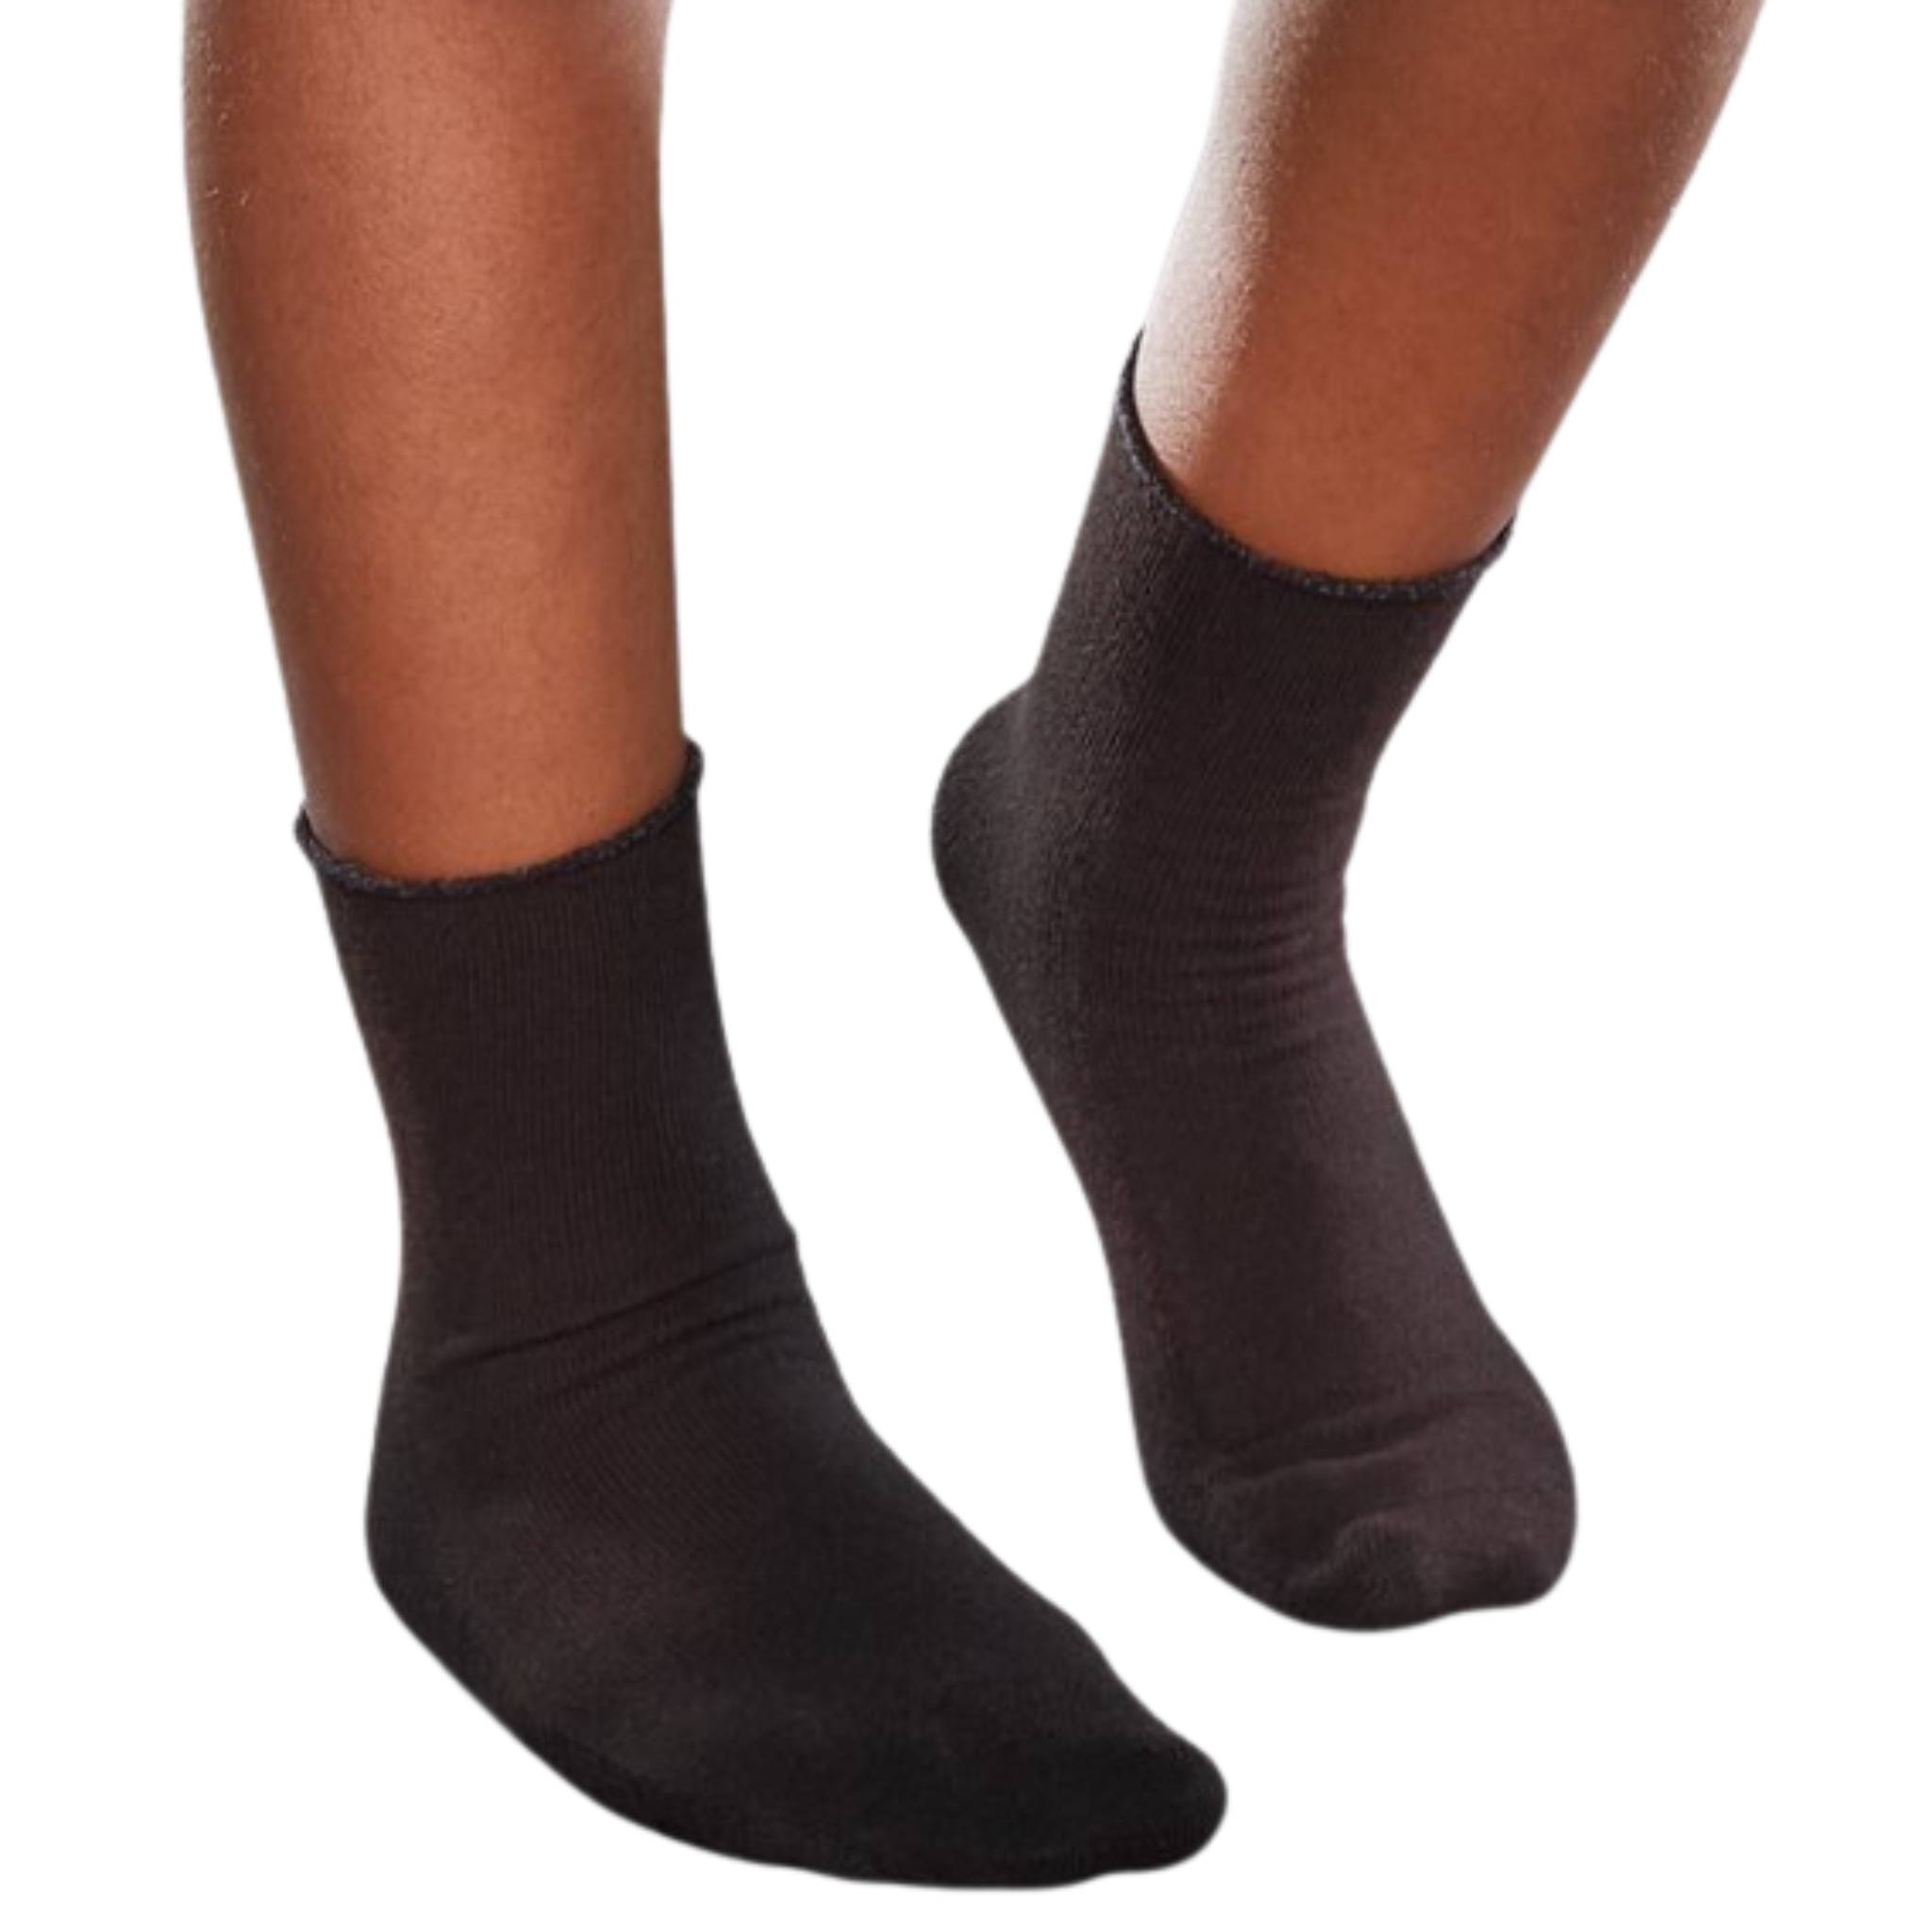 SmartknitKIDS - Absolutely Seamless Socks - Ultimate comfort sock (single pair)